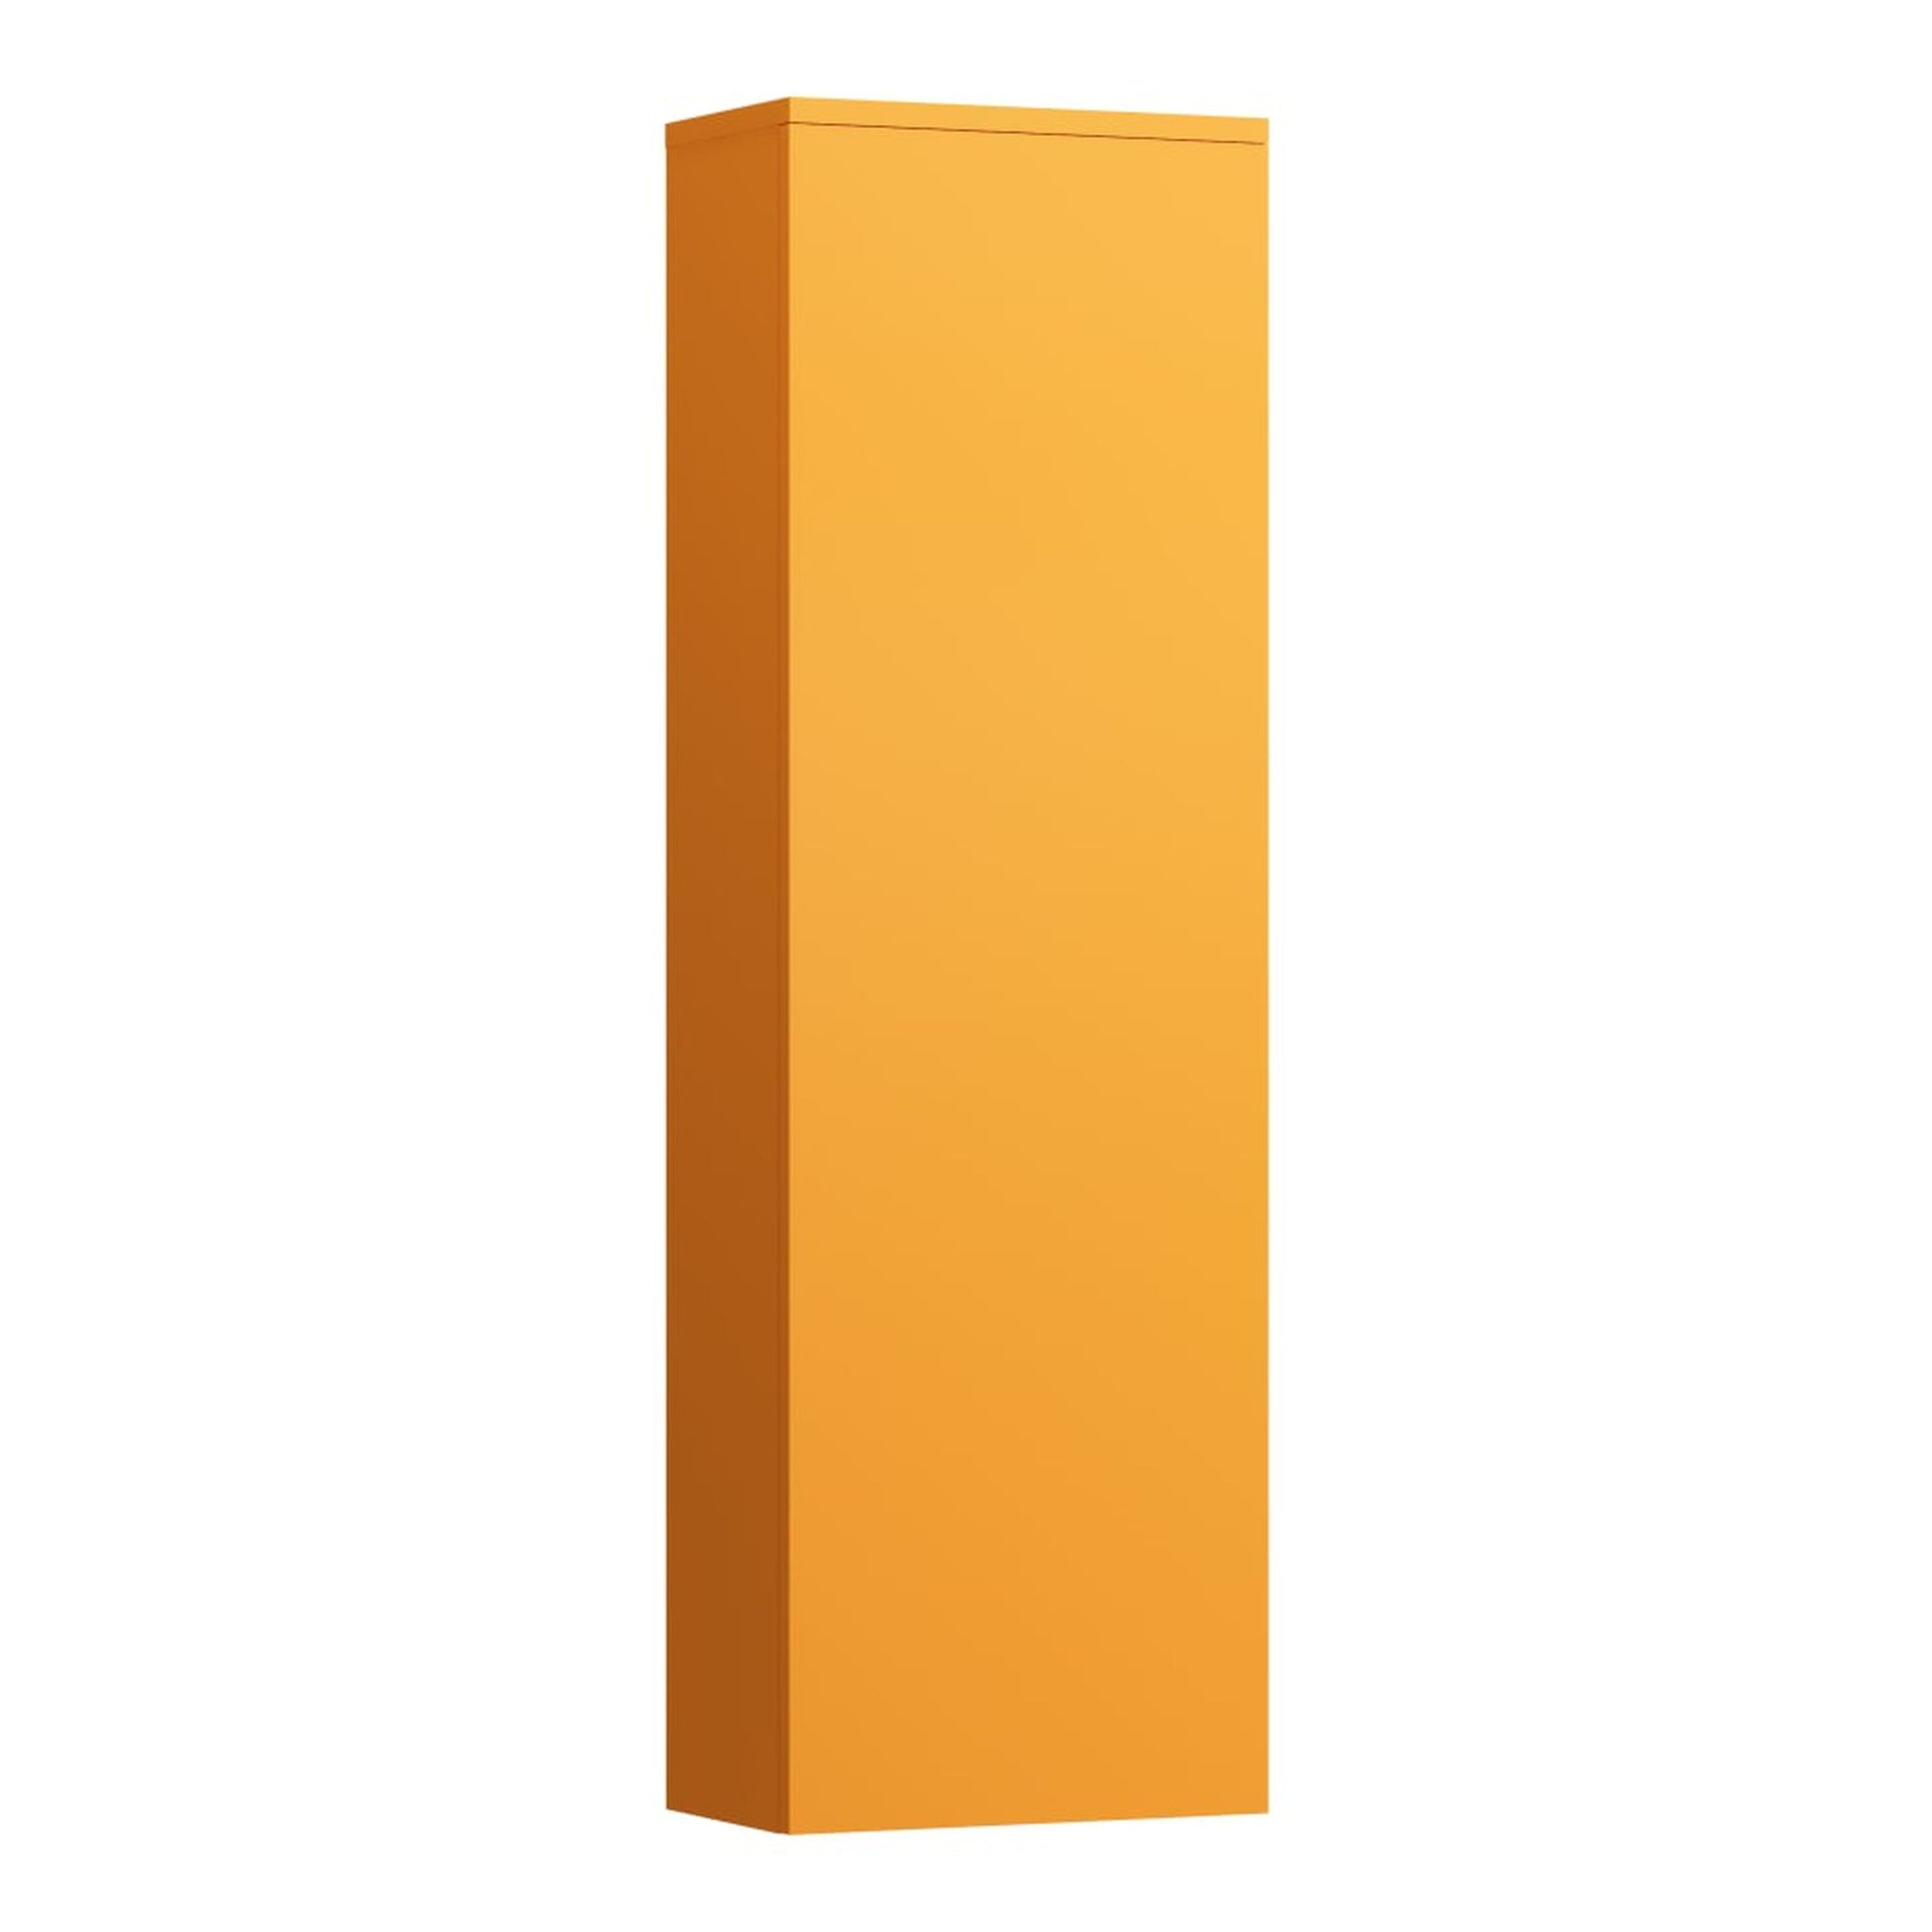 Laufen Kartell 16" x 51" 1-Door Right-Hinged Ochre Brown Wall-Mounted Tall Cabinet With 4 Fixed Glass Shelves